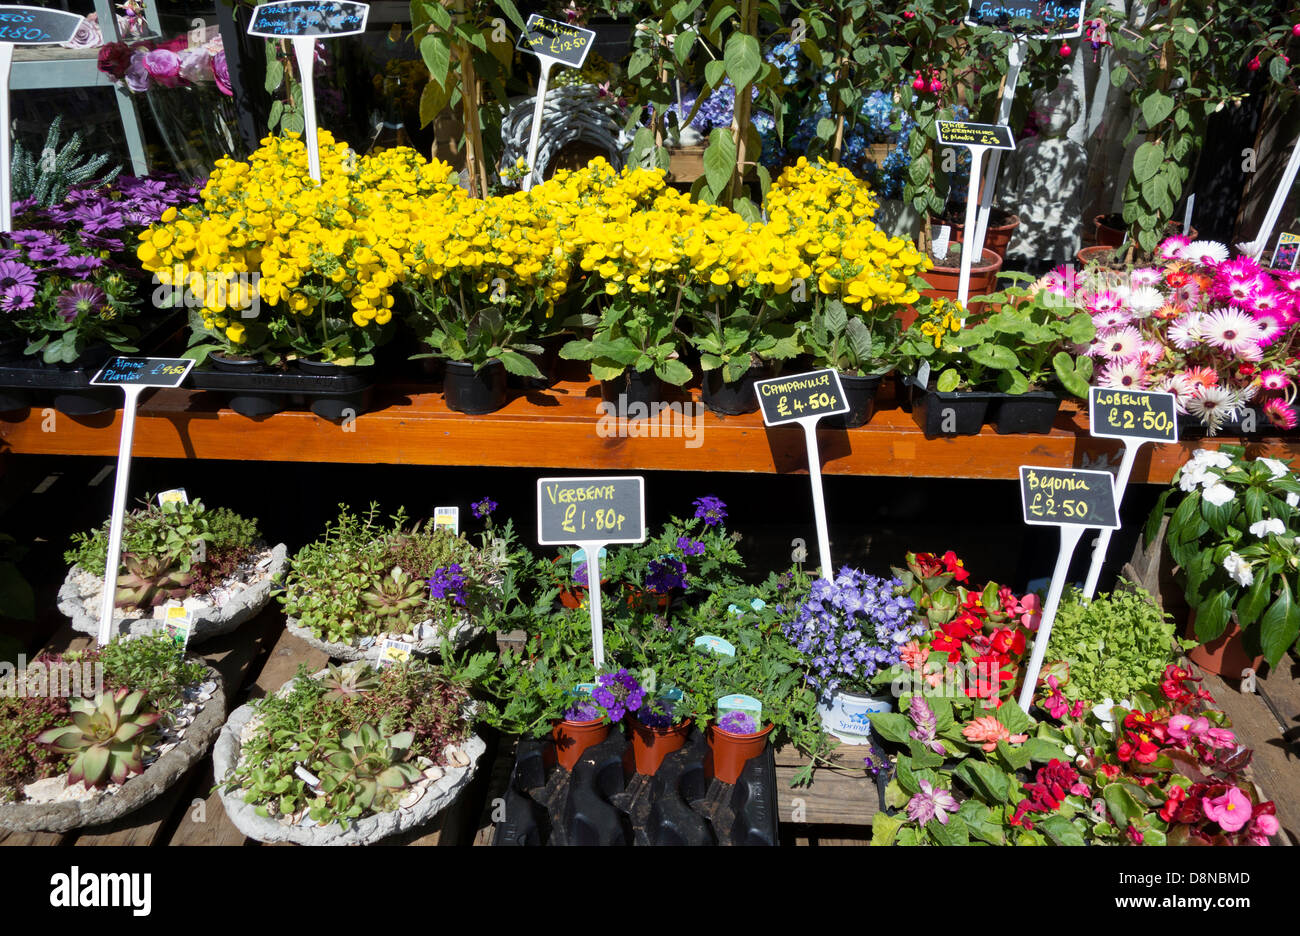 Plants for sale at a florist in Matlock, Derbyshire, England, U.K. Stock Photo